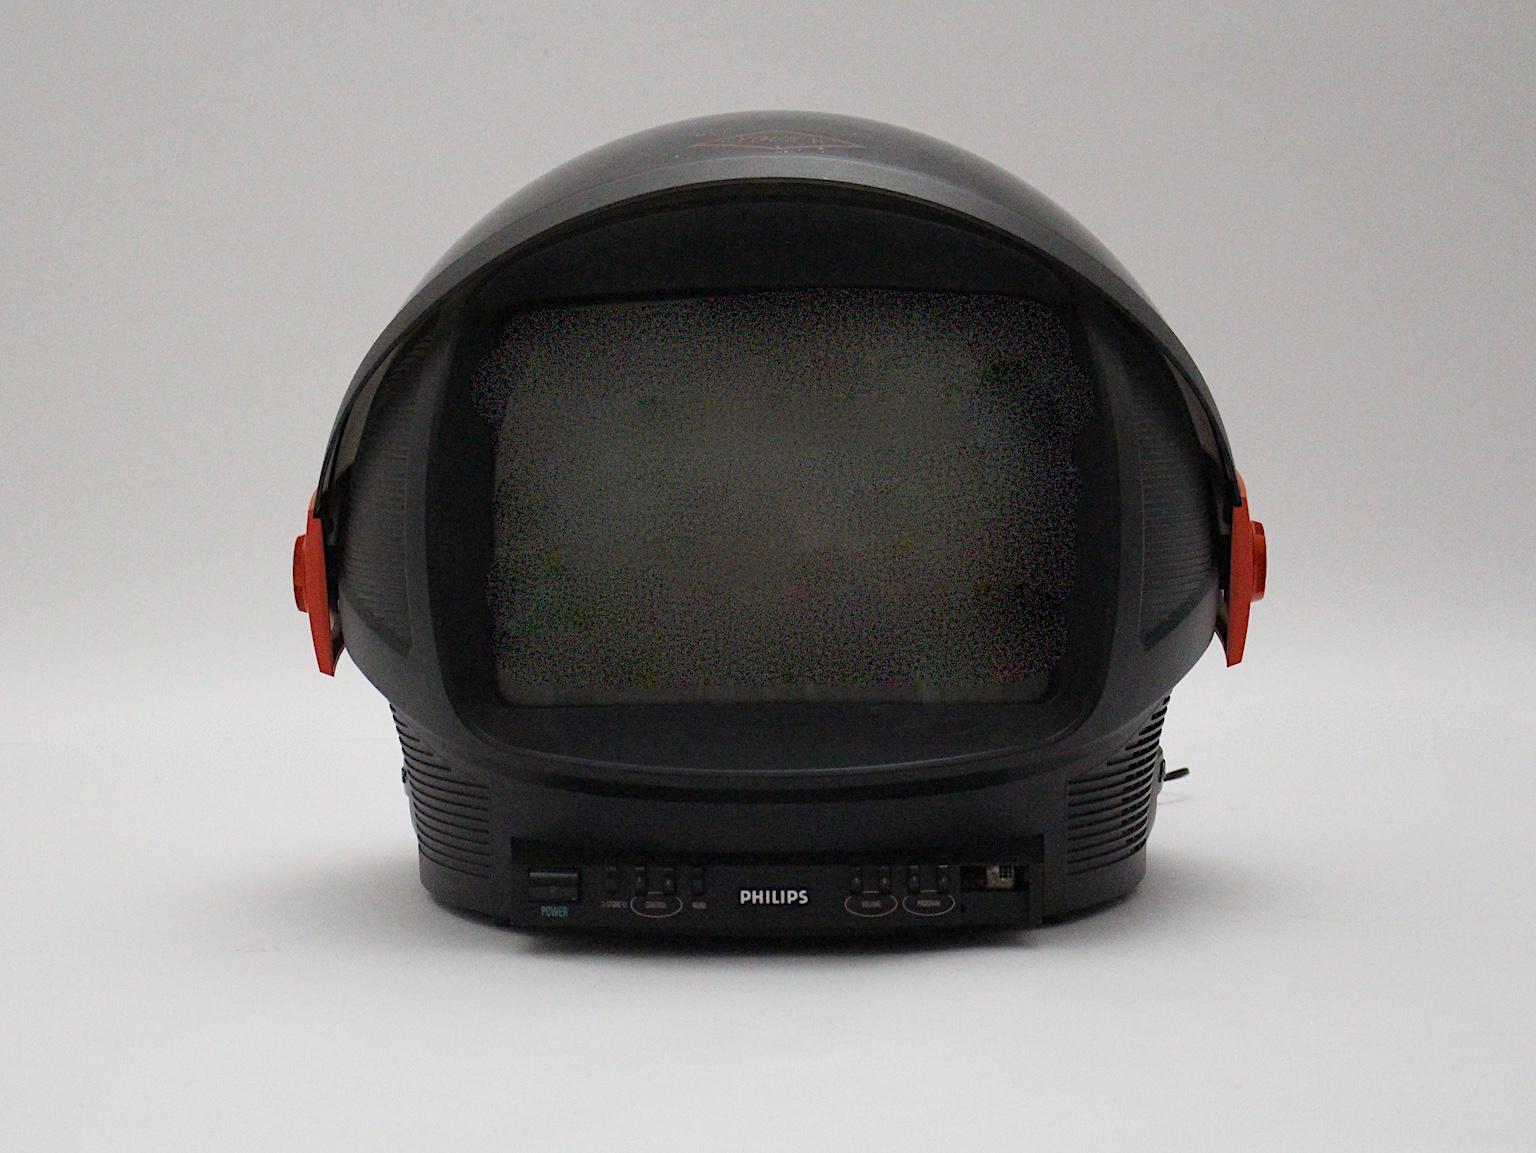  Space Age vintage red and plastic television named discoverer, which was manufactured by Philips, Netherlands, 1980s.
Its outstanding shape makes this design piece so fascinating.
The case of the television is foldable and looks like a helmet.
It